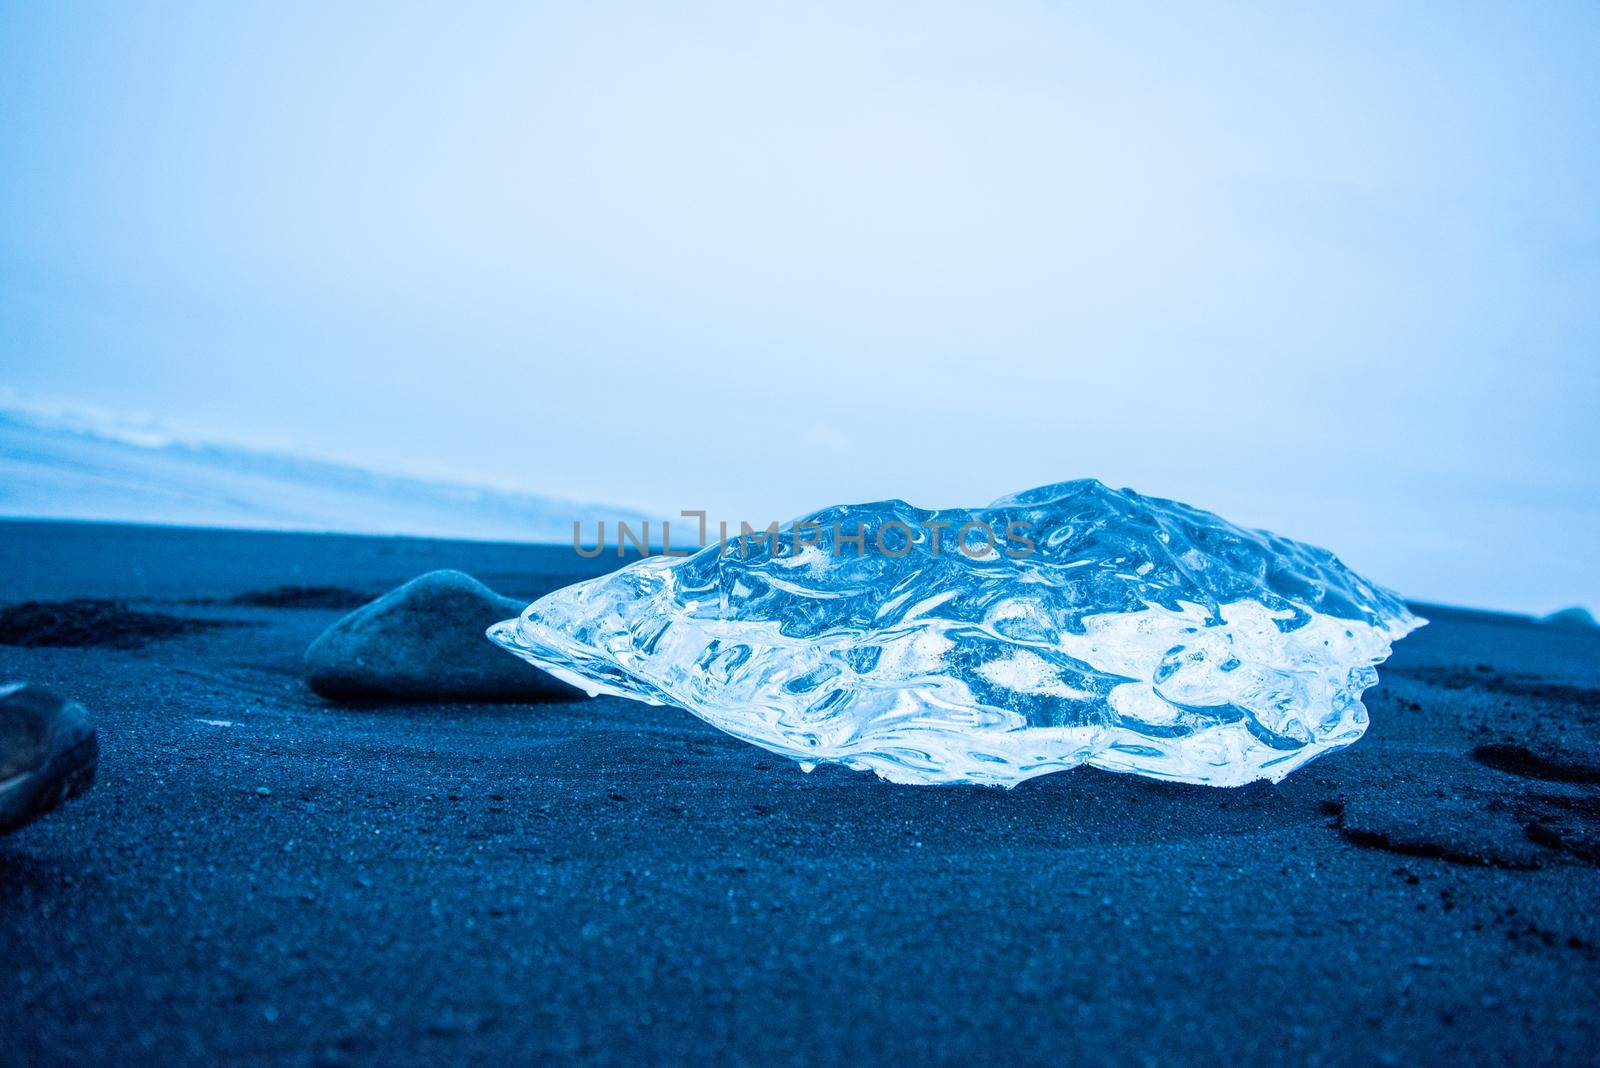 Piece of glacier beached in Iceland by jyurinko